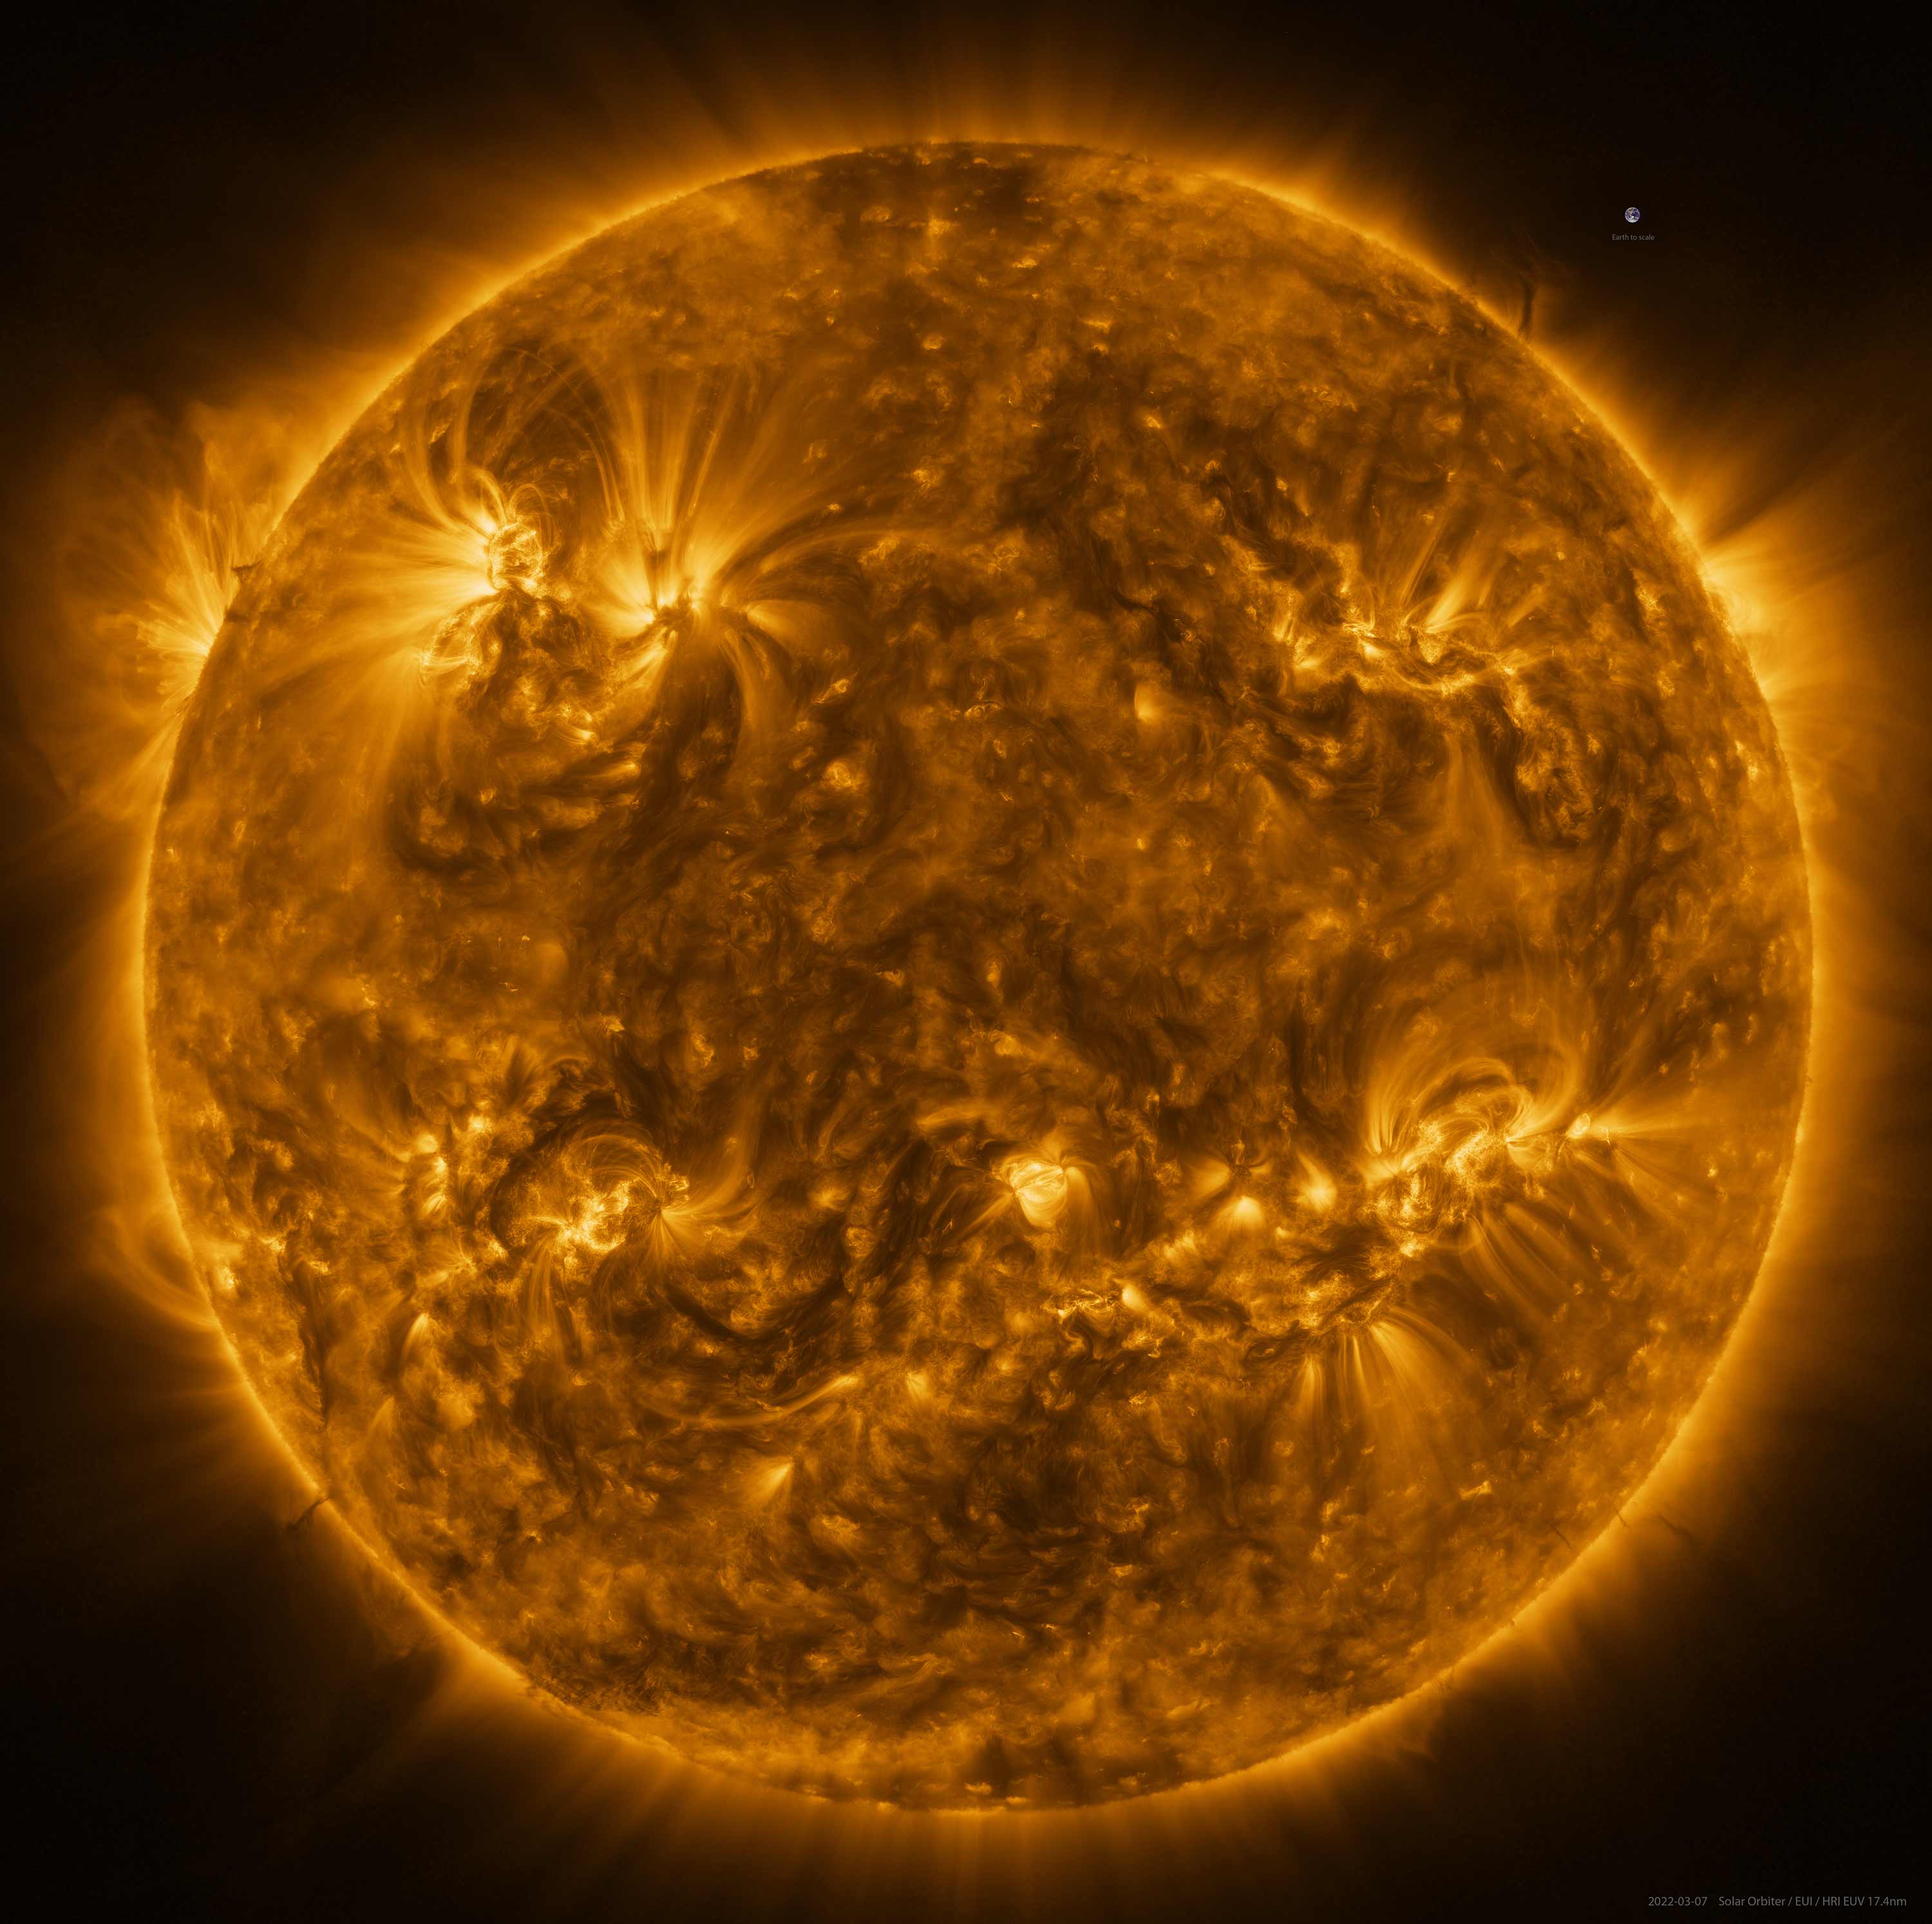 The Solar Orbiter showed unprecedented details of the <a href="https://www.cnn.com/2022/03/26/world/solar-orbiter-sun-flyby-scn/index.html" target="_blank">sun&#39;s</a> outer atmosphere in March, capturing the star in extreme ultraviolet light.